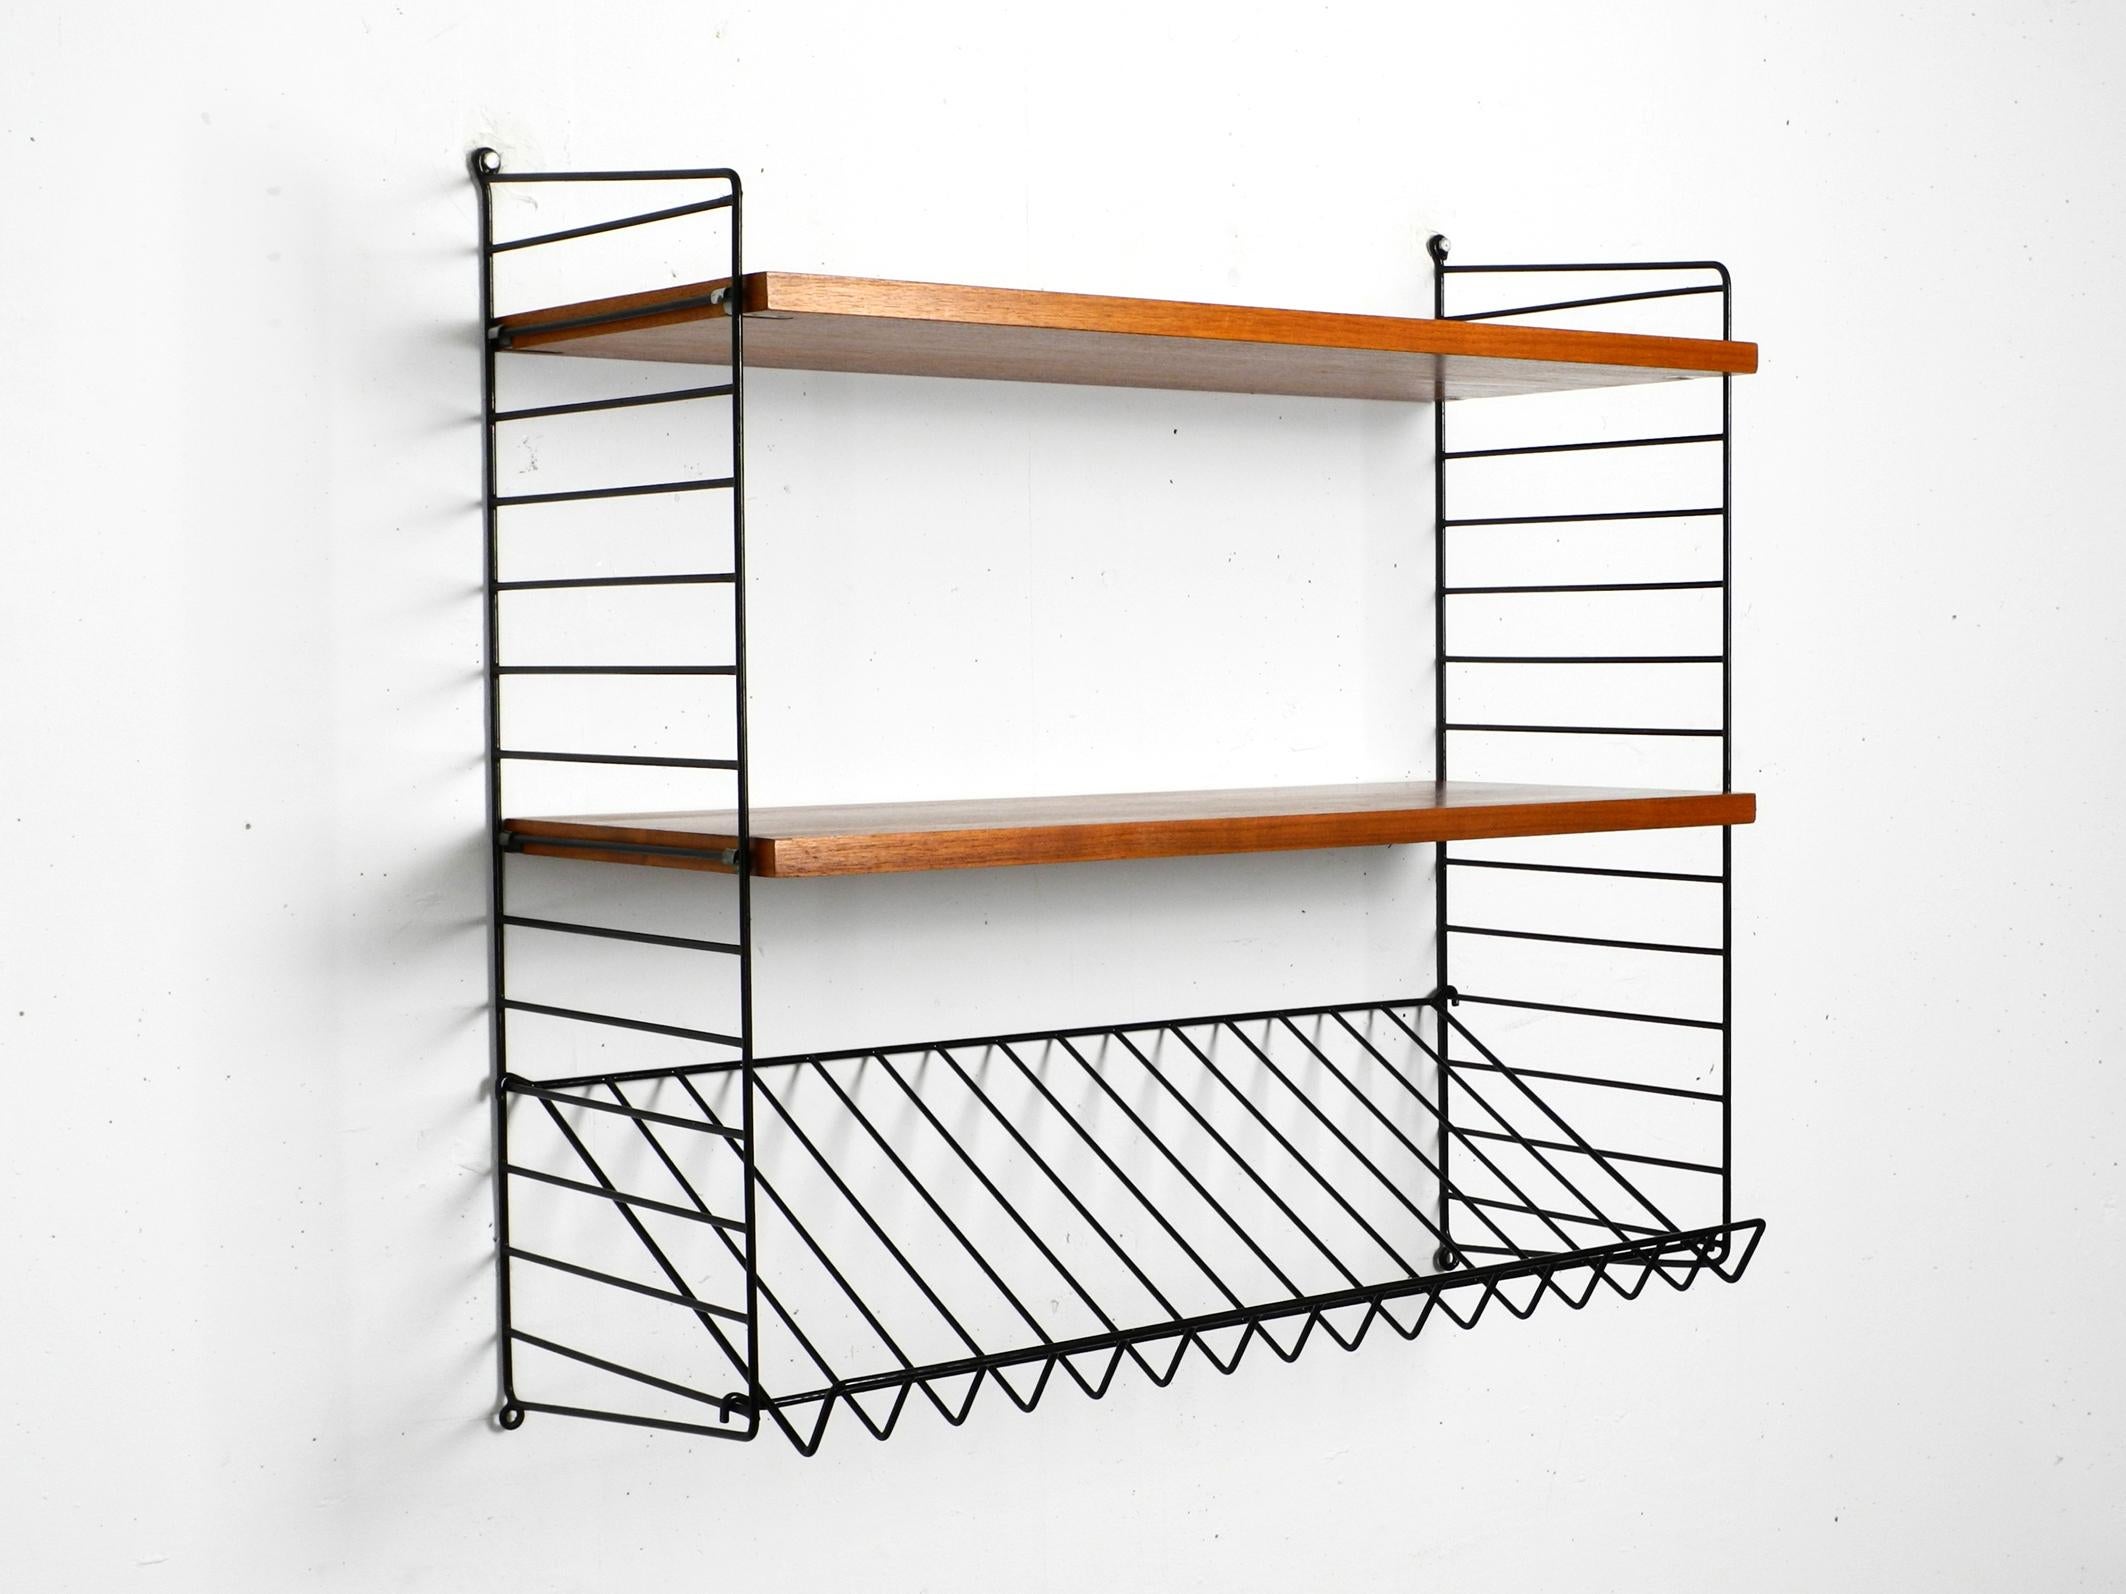 Original 1960s Nisse Strinning String teak wall shelf. Made in Denmark.
Two ladders with two shelves with a depth of 30 cm and one magazine rack.
All wooden parts are covered with teak veneer.
Very clean with few normal signs of use.
All ladders are